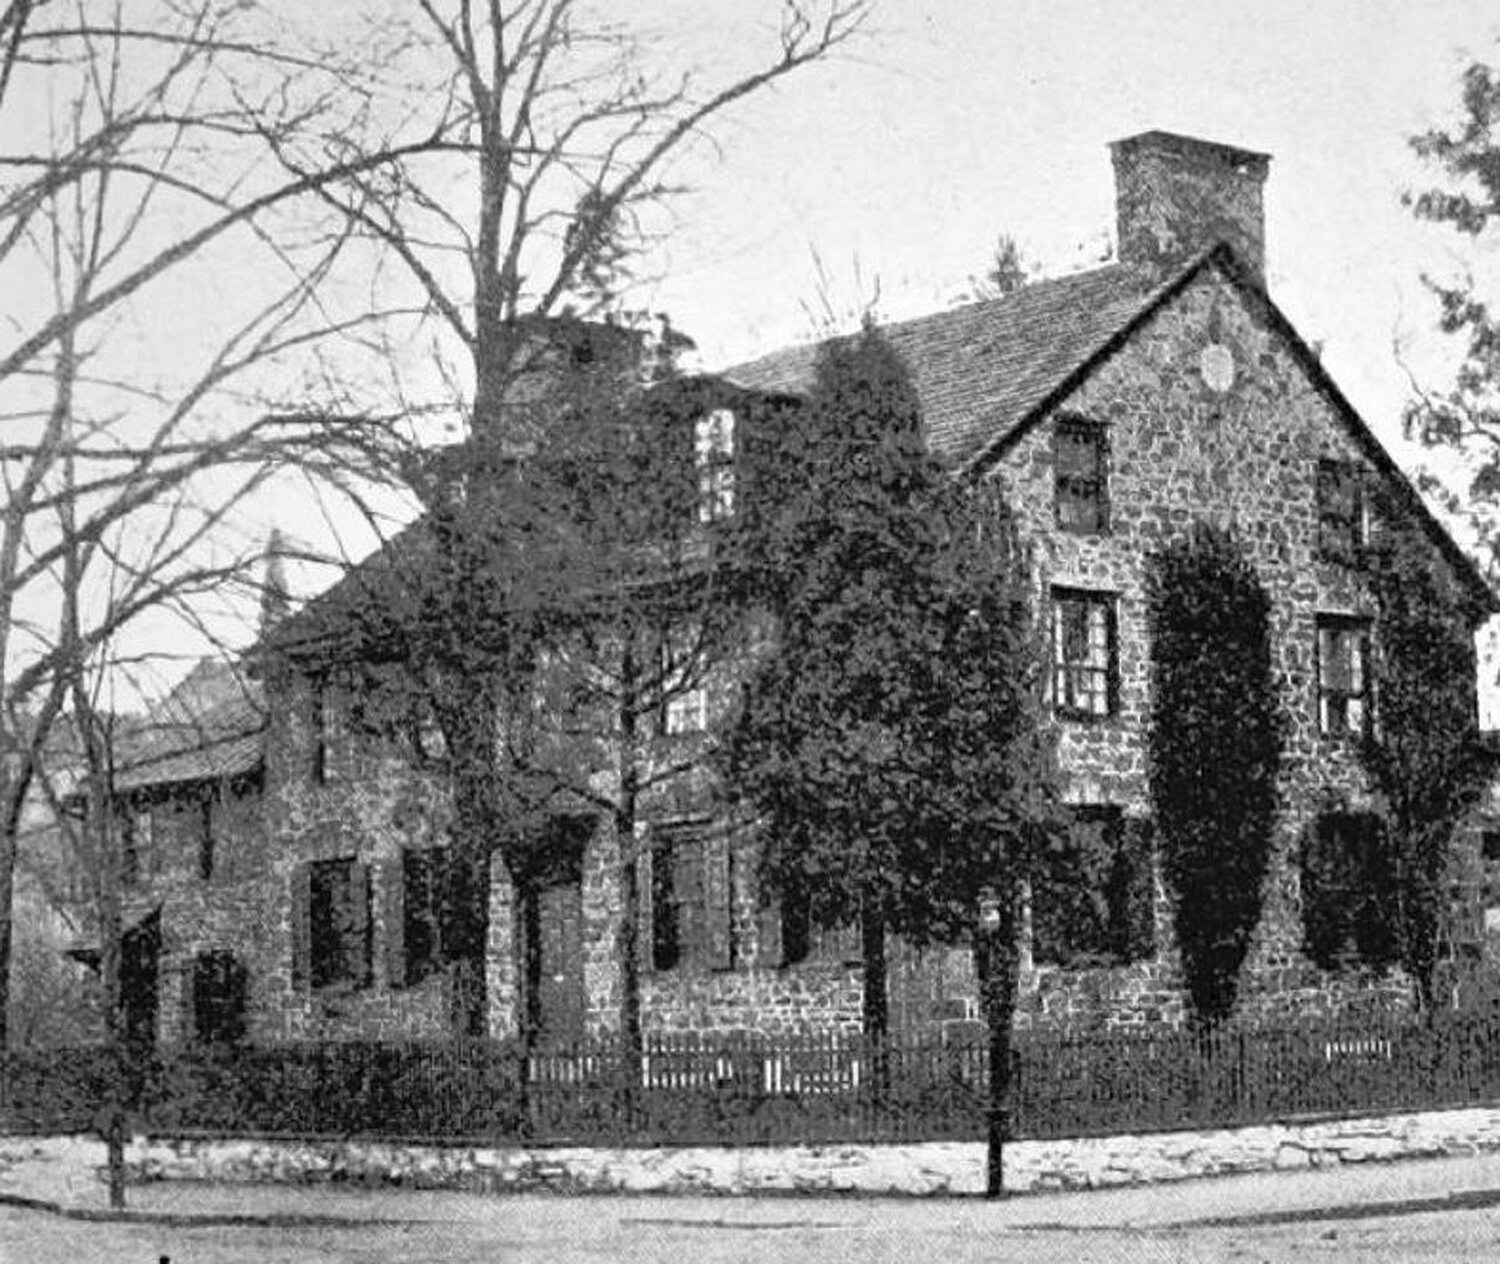 The Parry Mansion, seen here in about 1892.